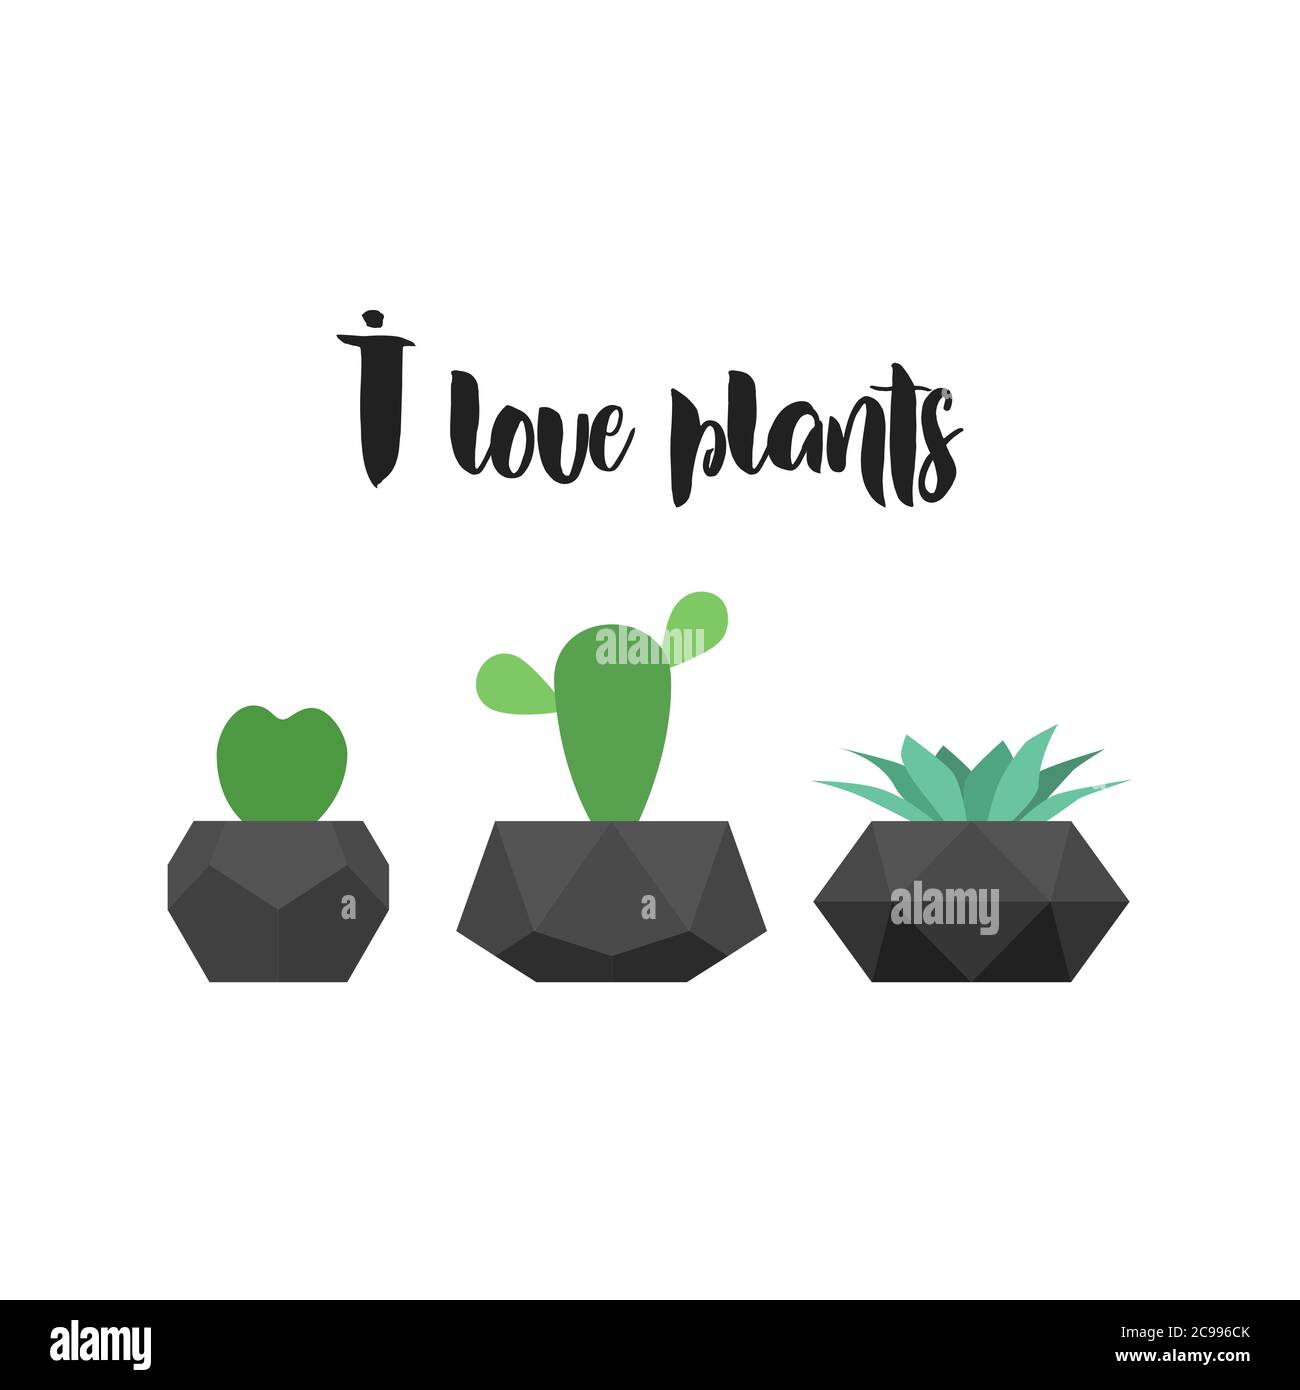 I love plants. Vector graphic for t-shirt print. Succulent and cactus plants in pots Stock Vector